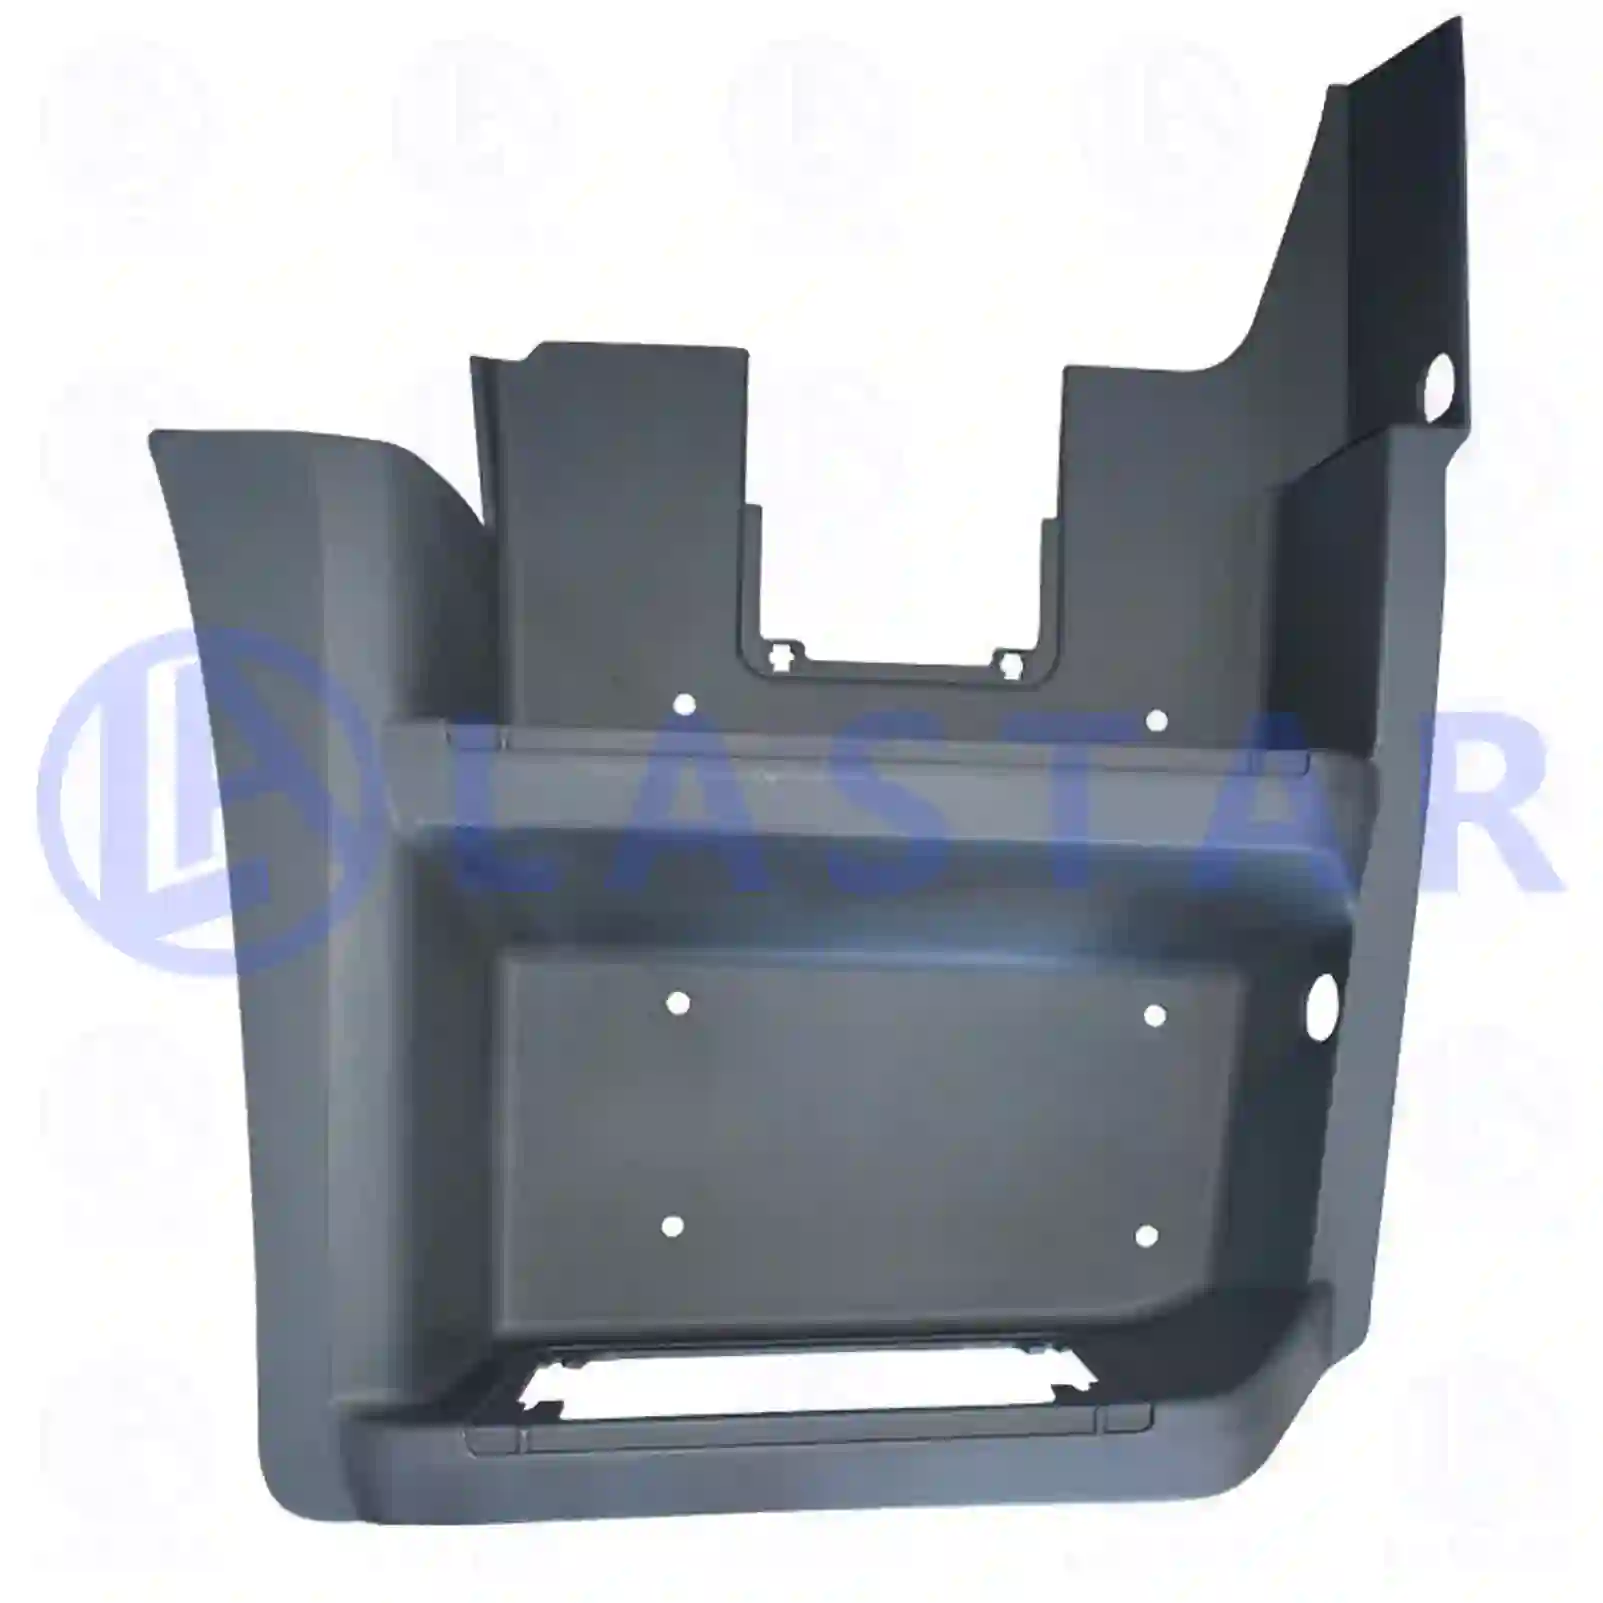 Step well case, lower, right, 77719053, 9406662501 ||  77719053 Lastar Spare Part | Truck Spare Parts, Auotomotive Spare Parts Step well case, lower, right, 77719053, 9406662501 ||  77719053 Lastar Spare Part | Truck Spare Parts, Auotomotive Spare Parts